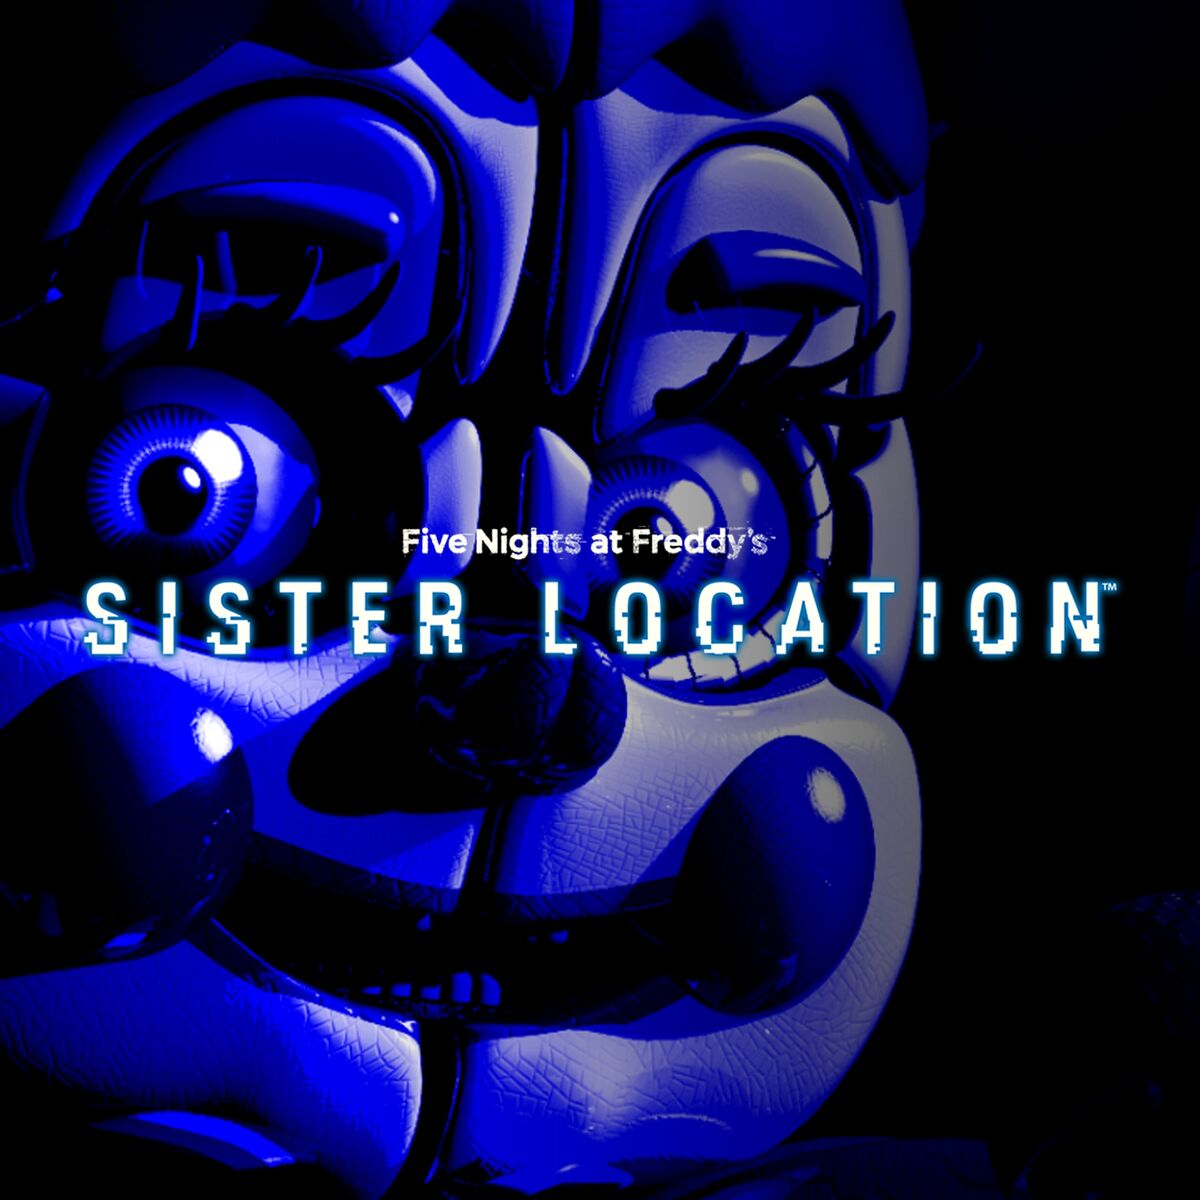 Five Nights At Freddy's 5: Sister Location